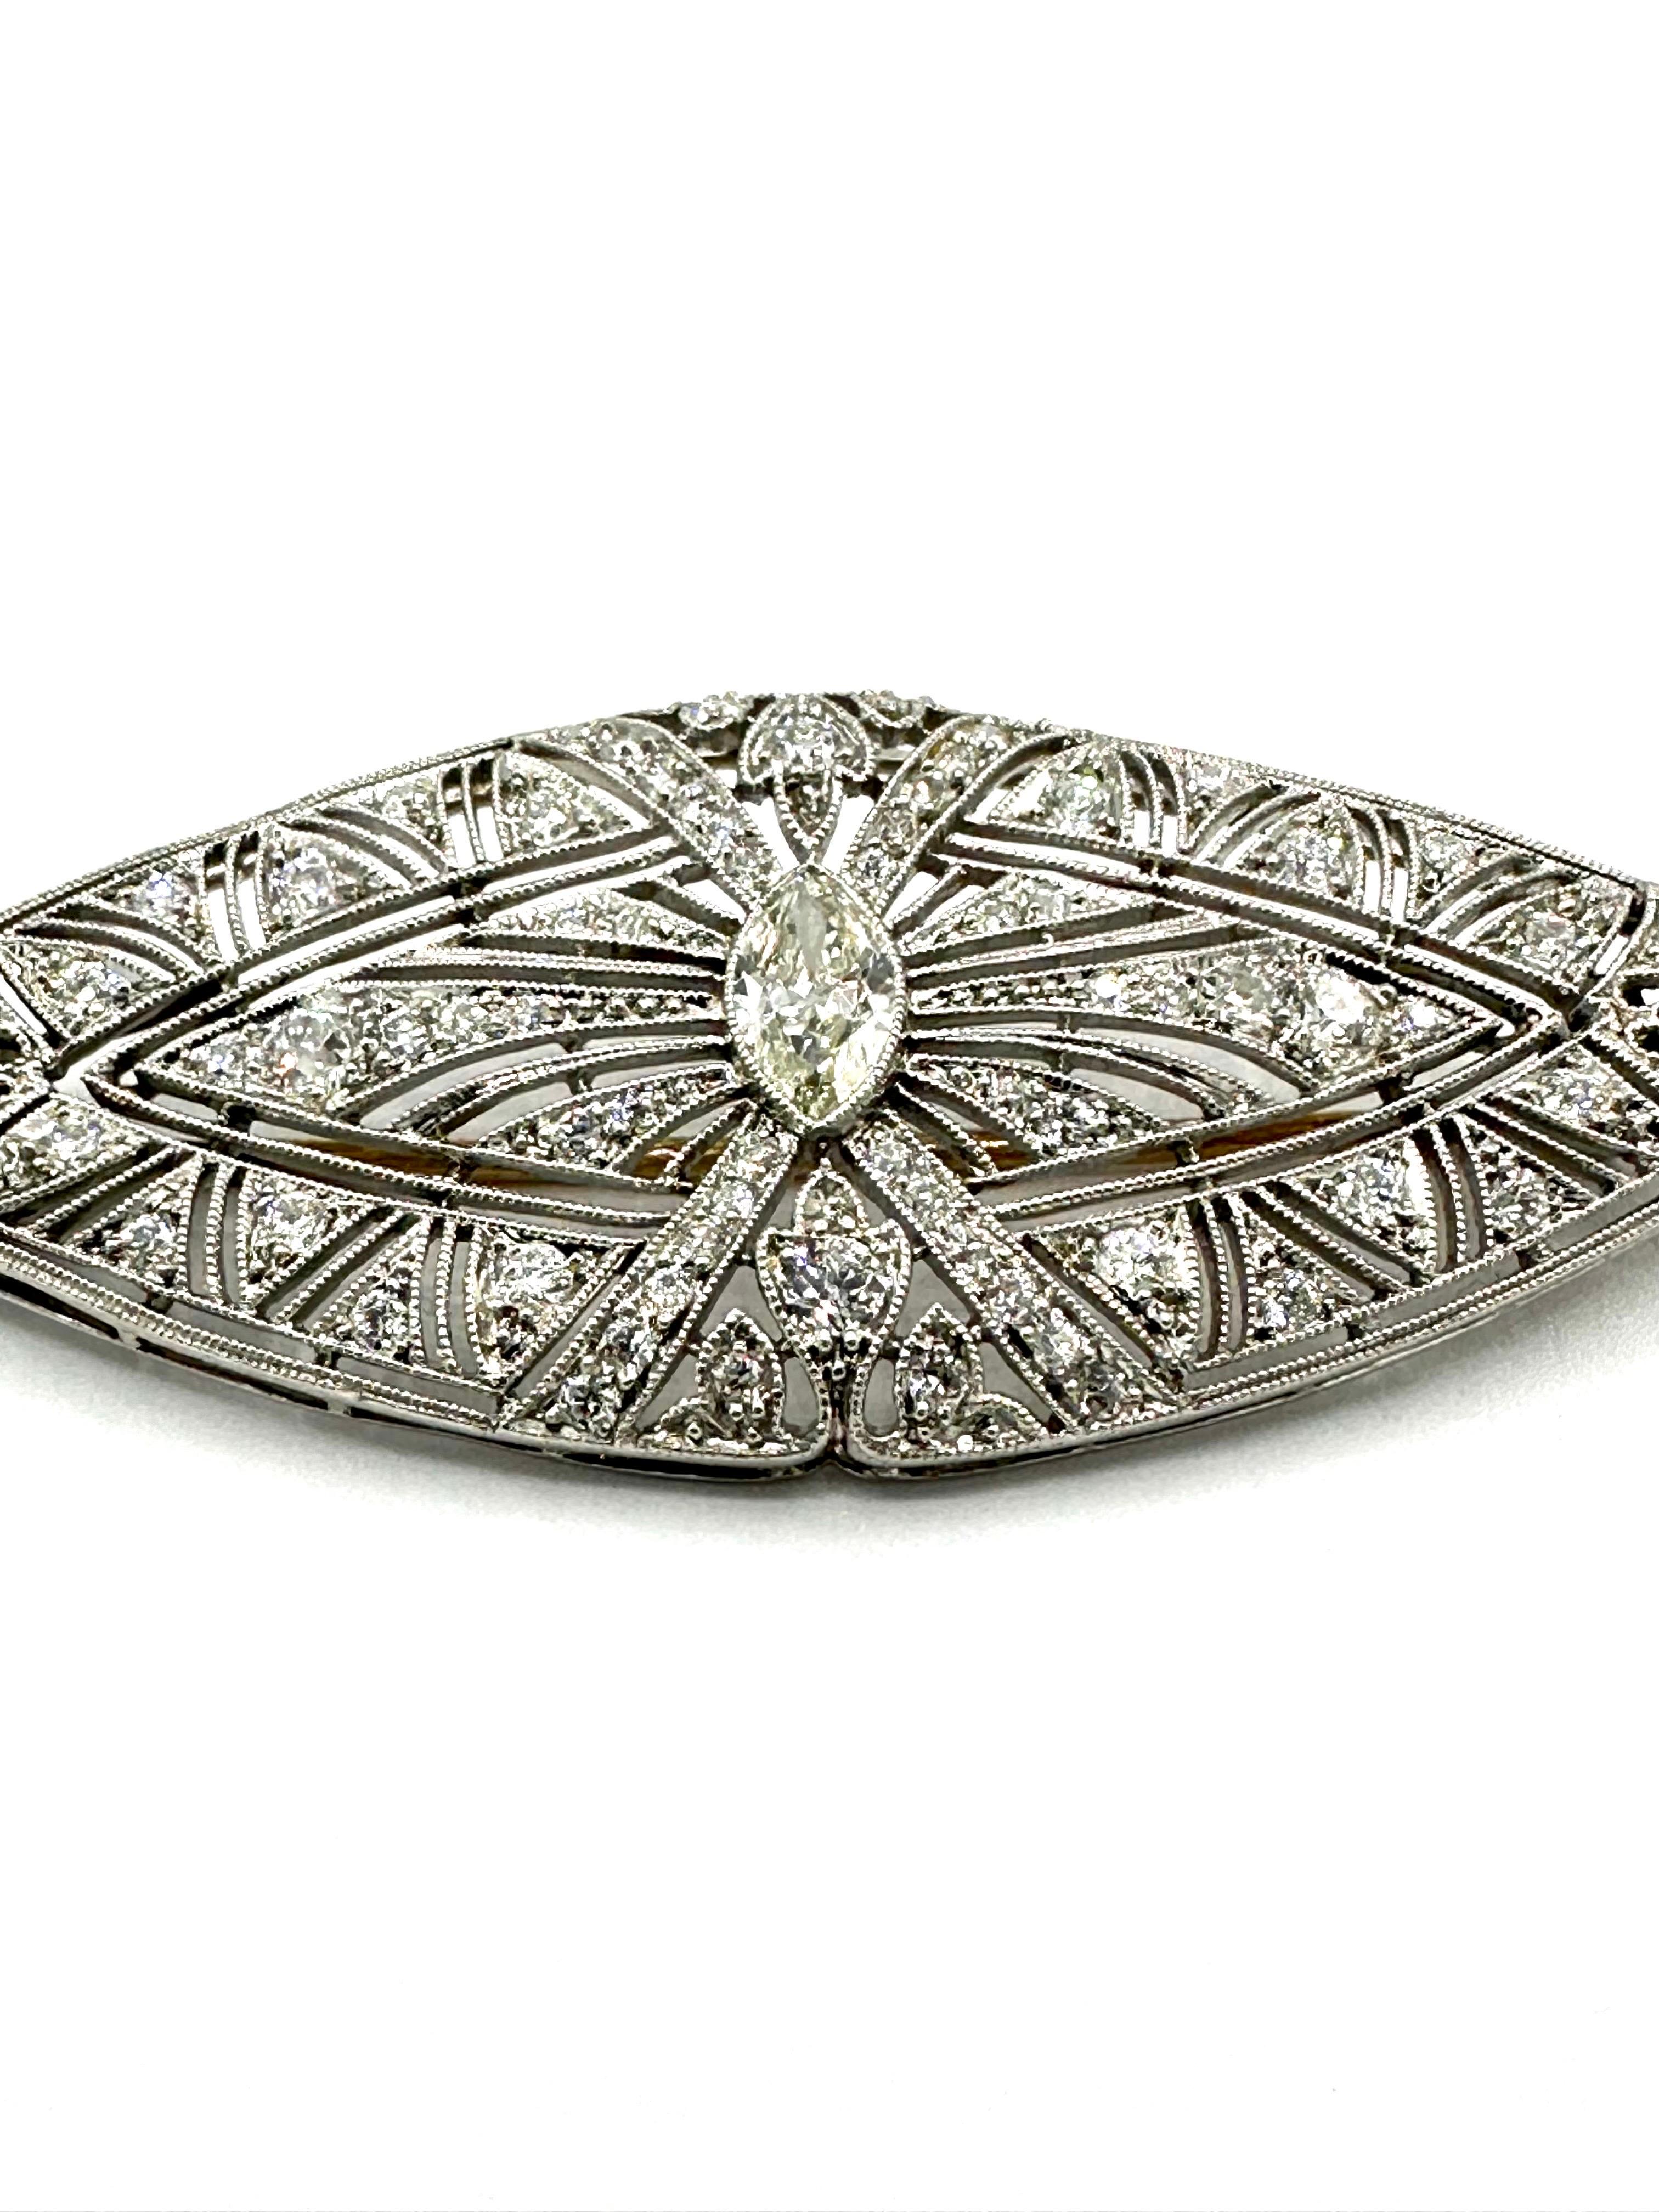 Art Deco 1.59 Carat Diamond Platinum Brooch In Excellent Condition For Sale In Chevy Chase, MD